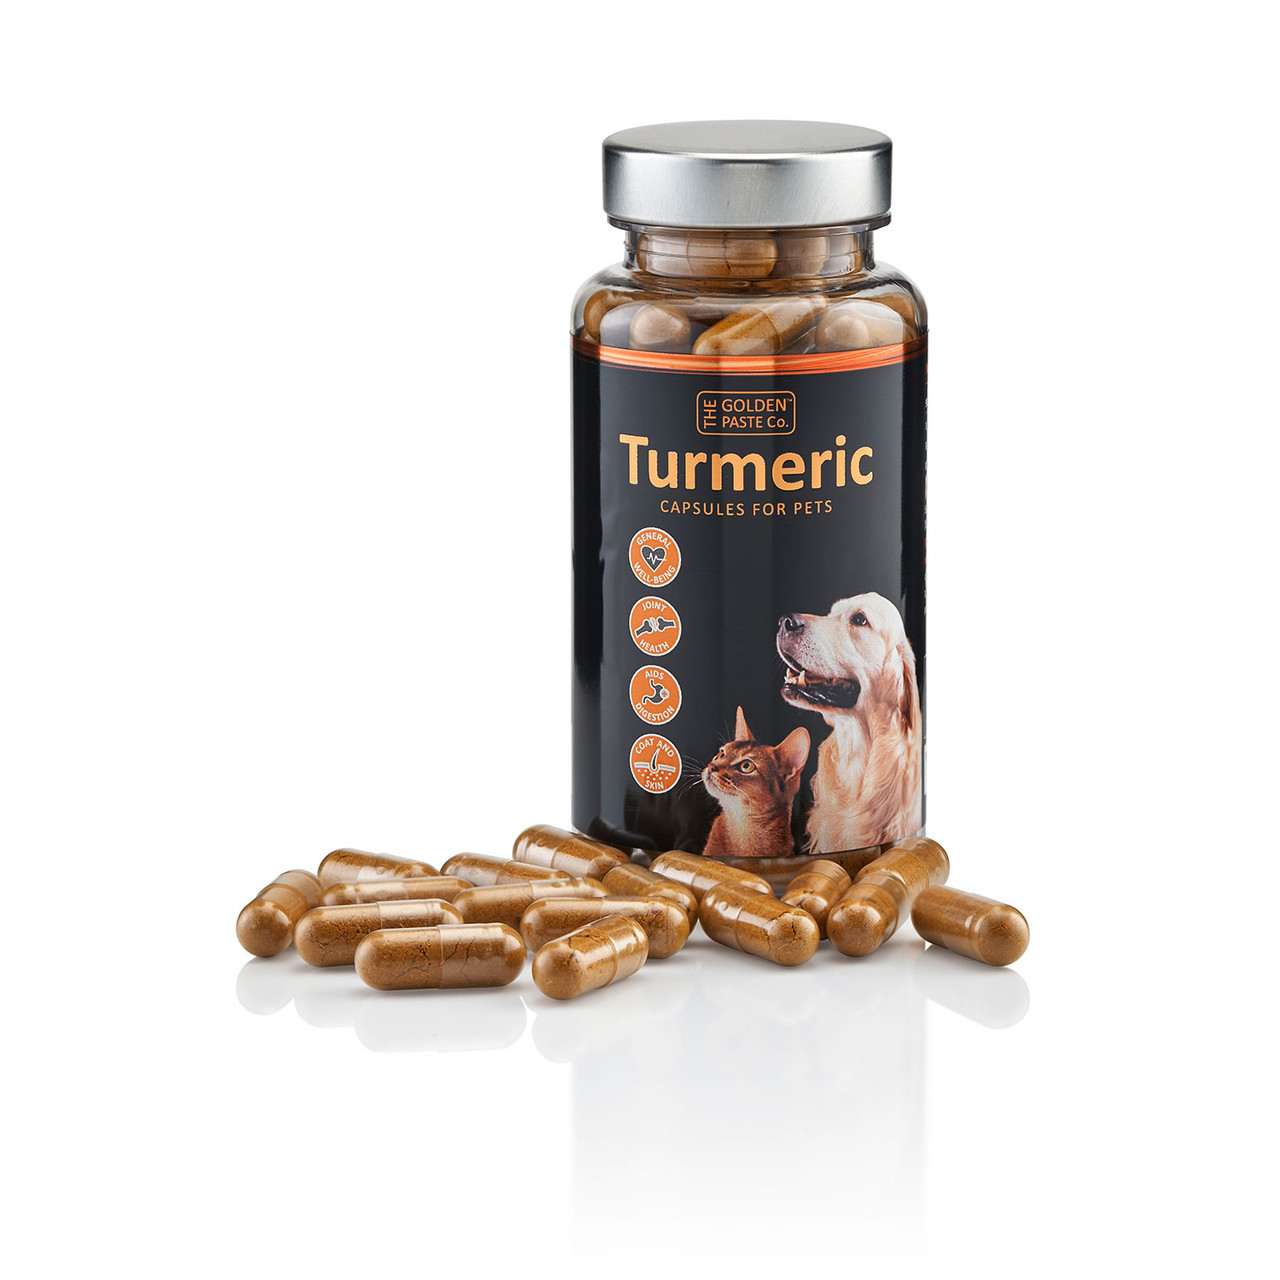 Golden Paste Company Turmeric Capsules for Pets